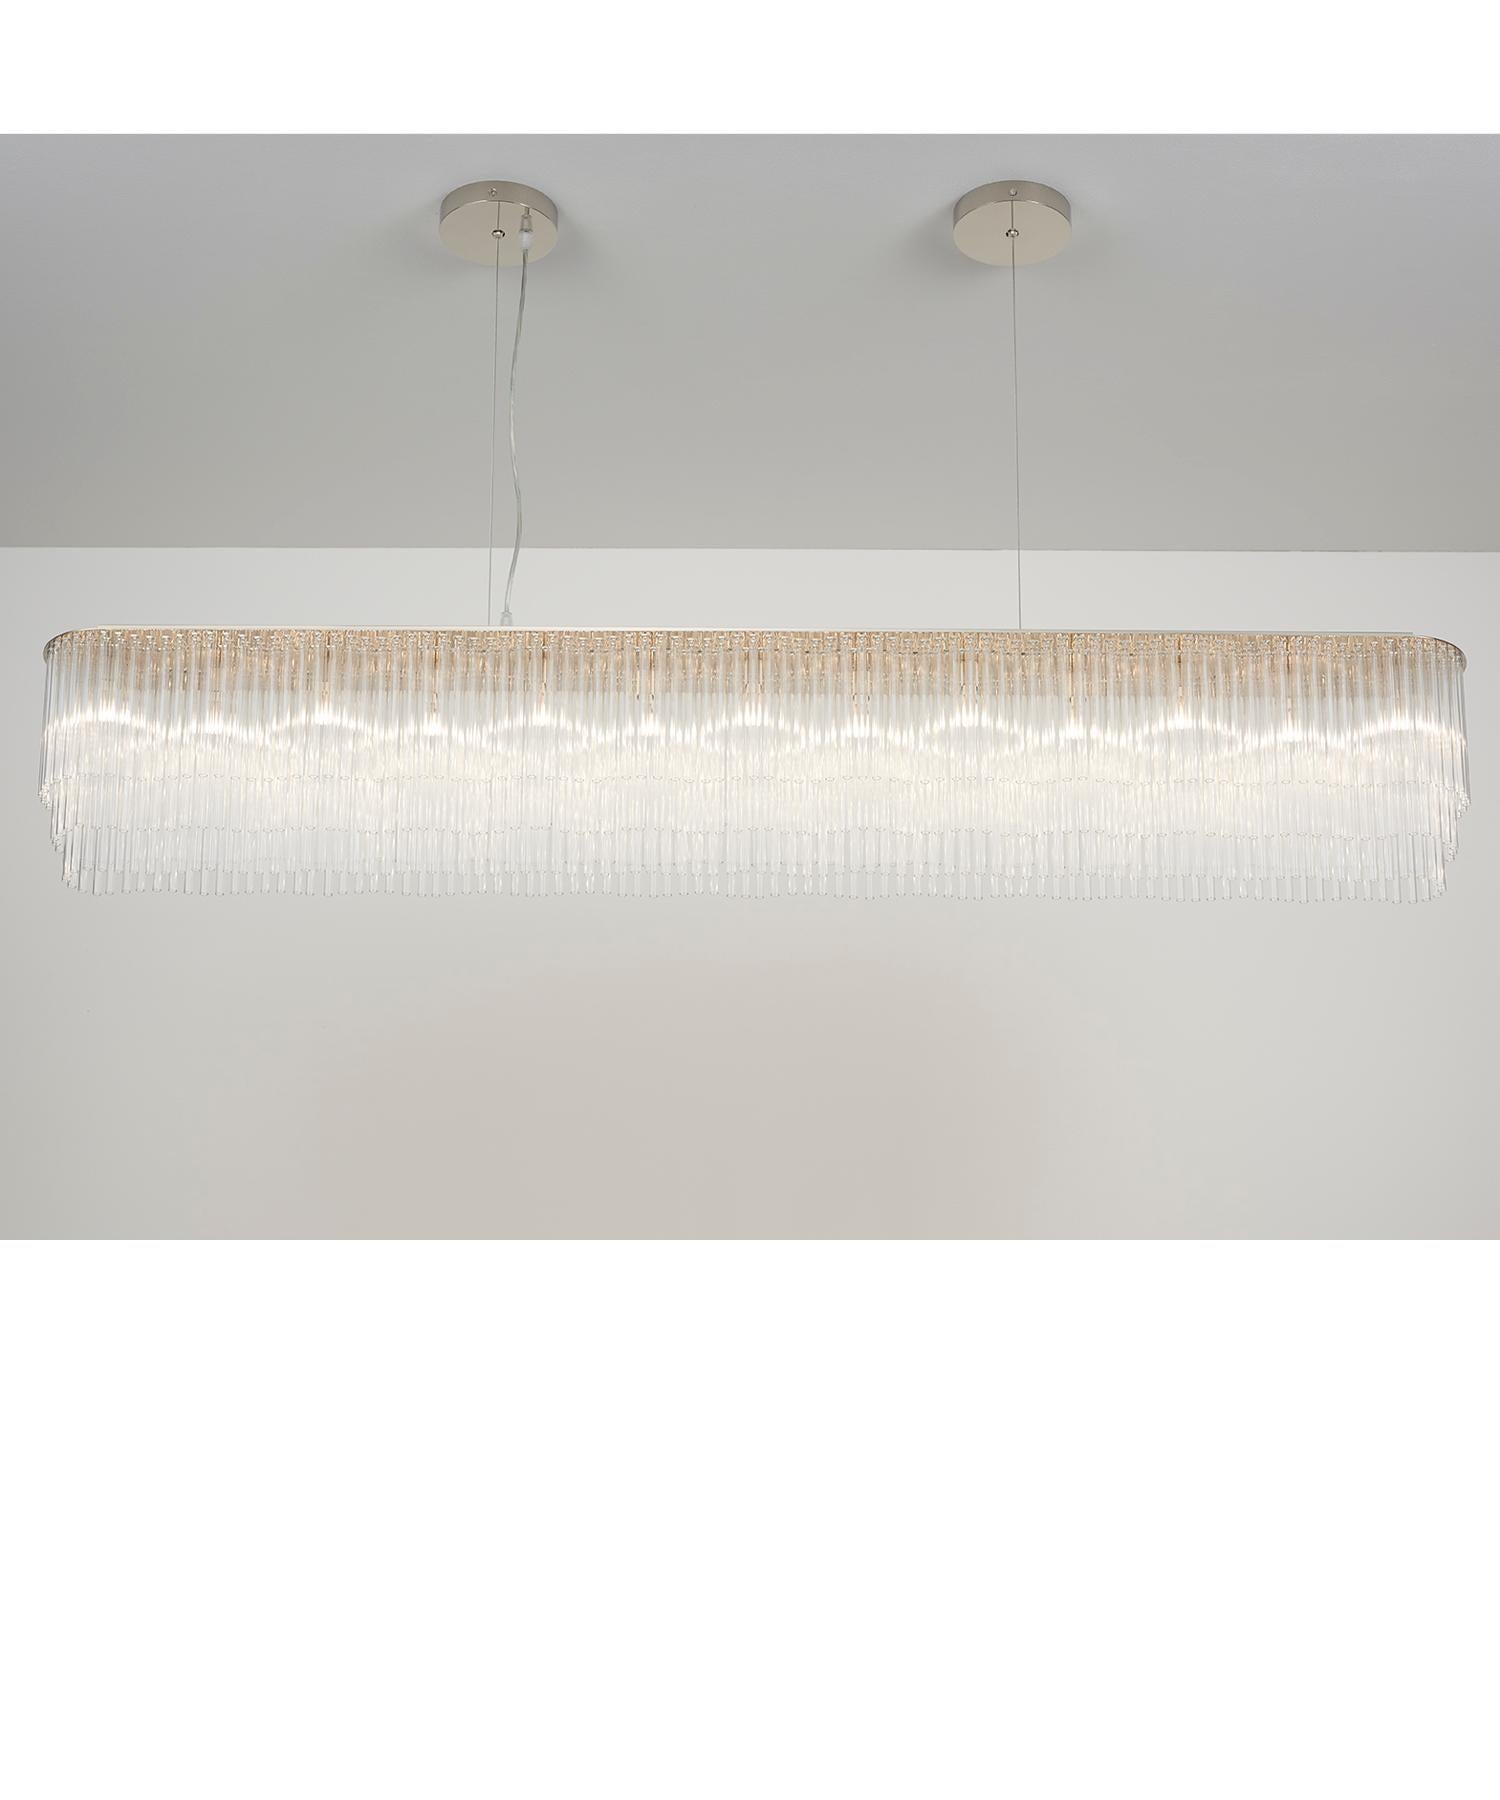 For interiors that require a more minimal luminaire, the Linear Chandelier Thin is a great lightweight alternative to the Linear Chandelier. It works equally well suspended in open-plan spaces or as a central feature over dining tables and work